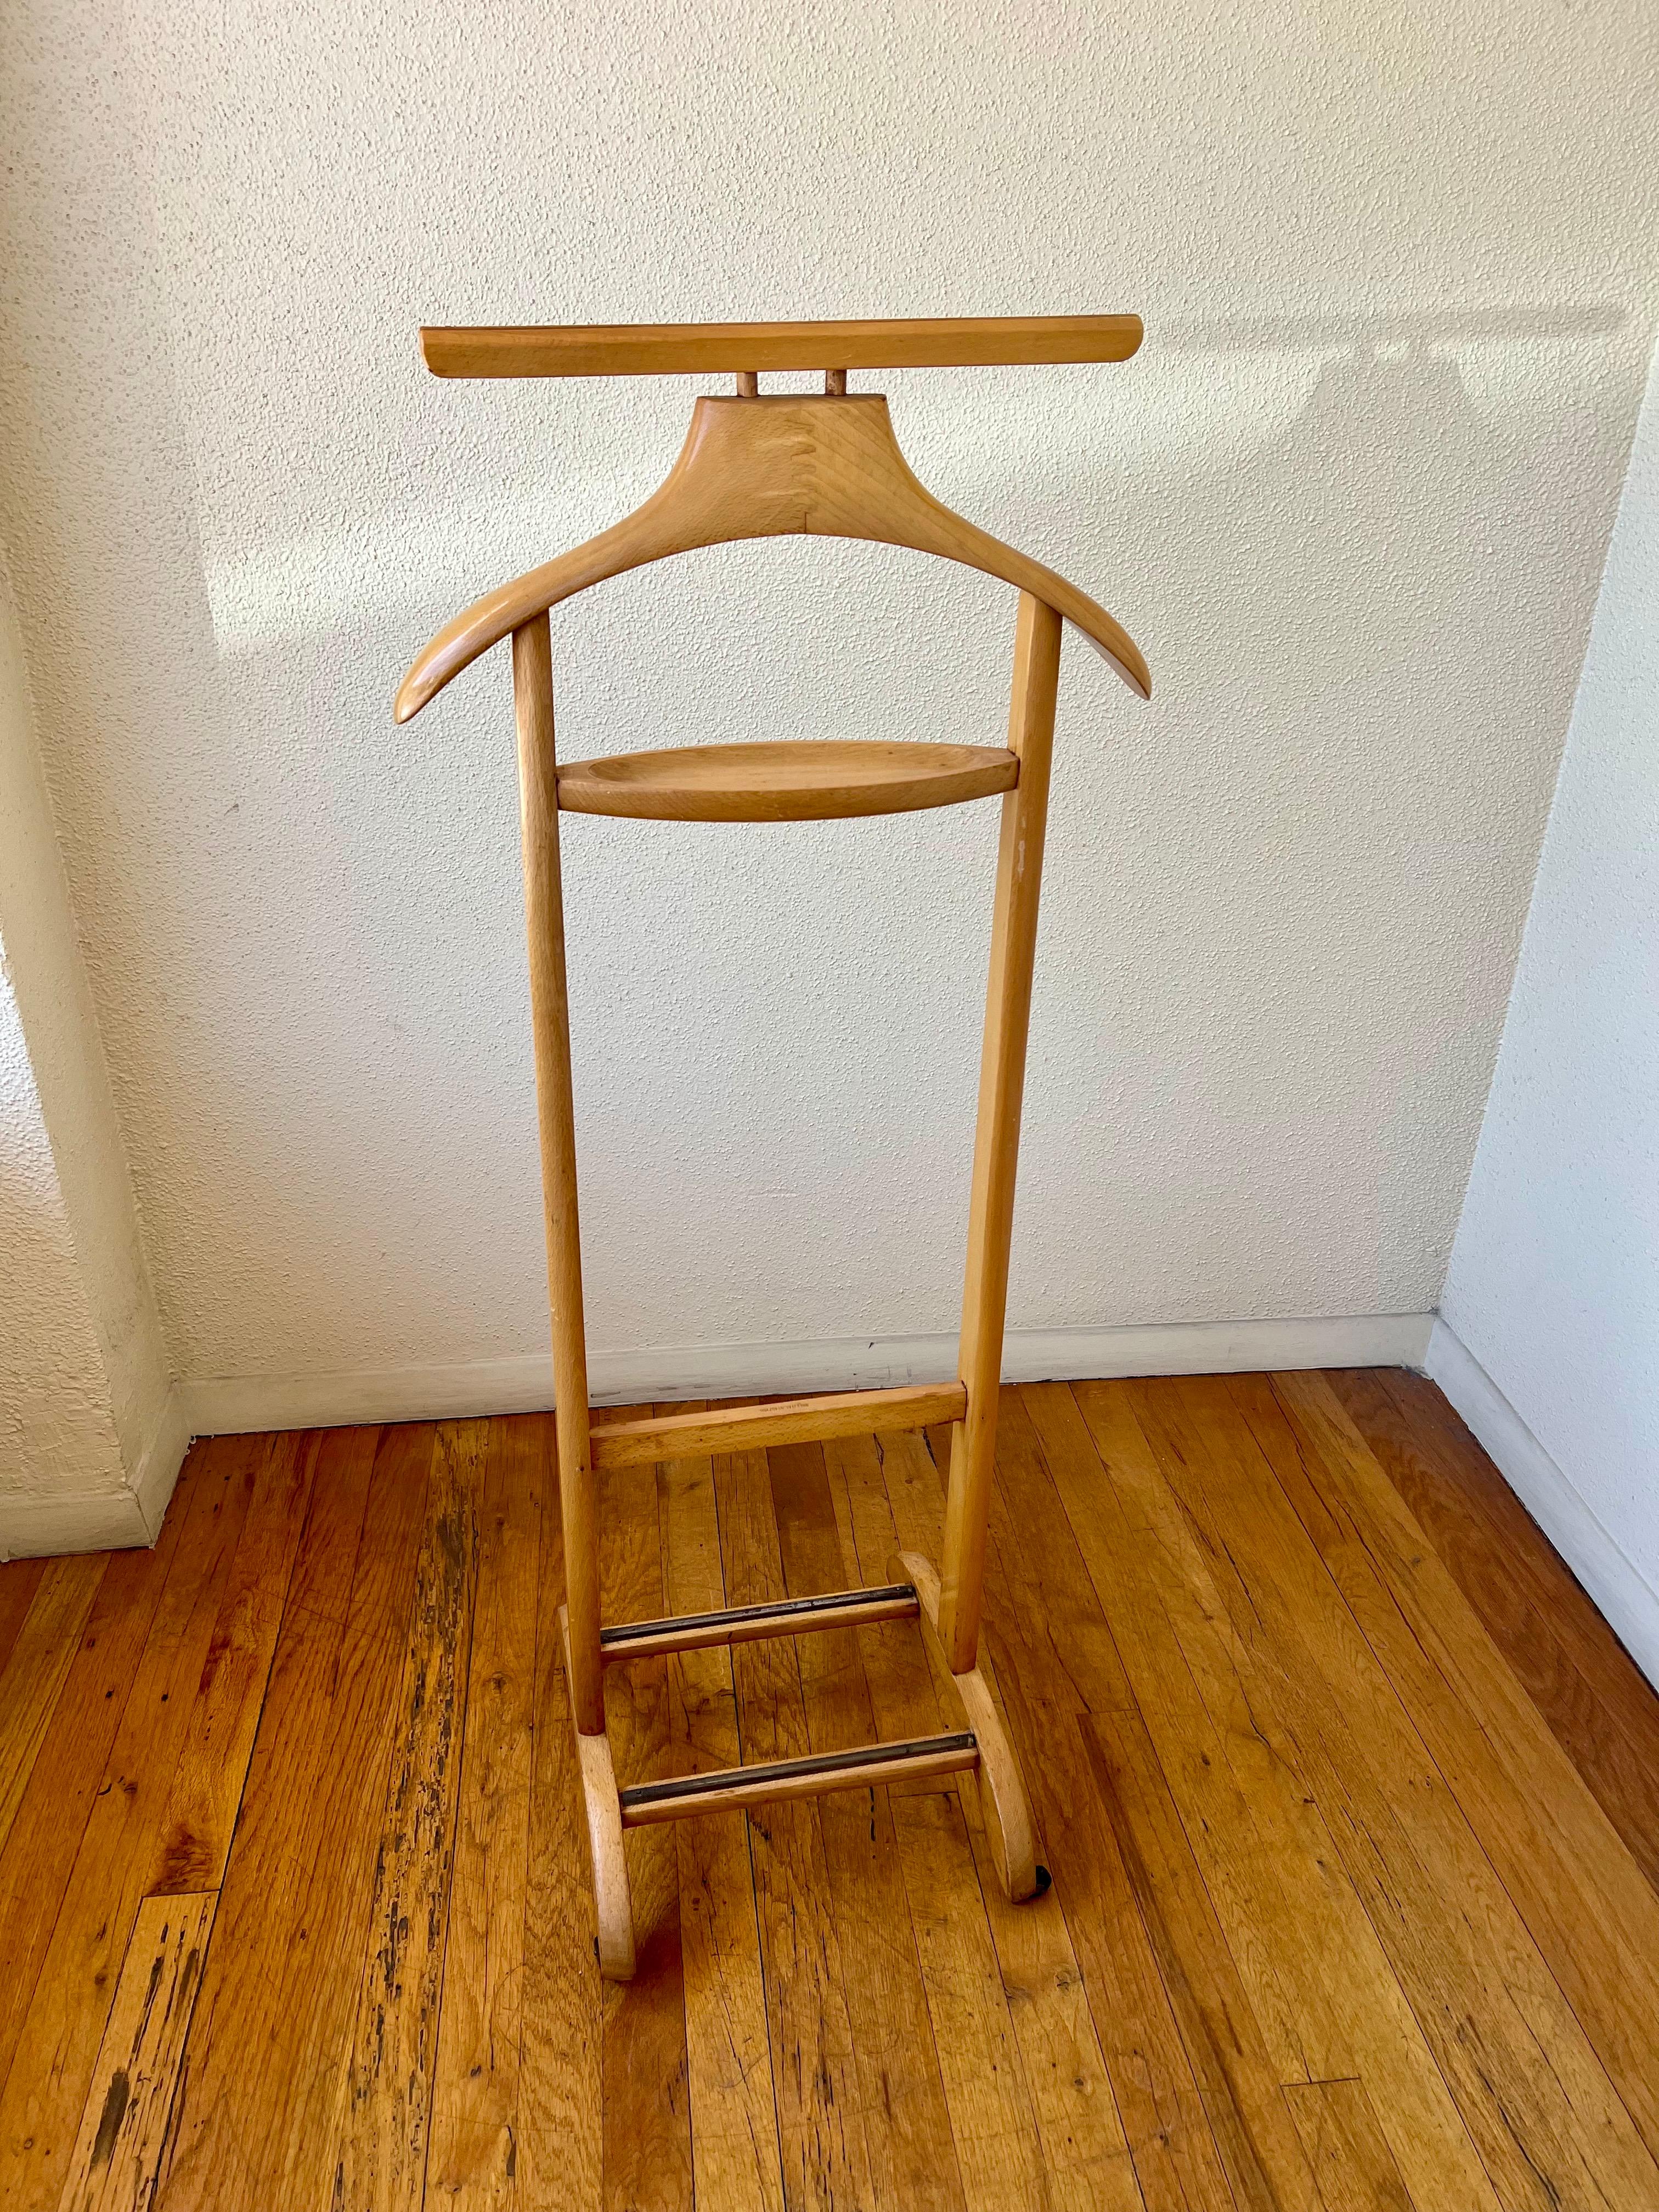 Elegant solid light maple Mid-Century Modern gentlemans valet by Ico & Luisa Parisi for Fratelli Reguitti was made of solid mahogany with brass details for shoe rest
The valet is stamped with FR (Fratelli Reguitti) Intern. Patent Made in Italy.